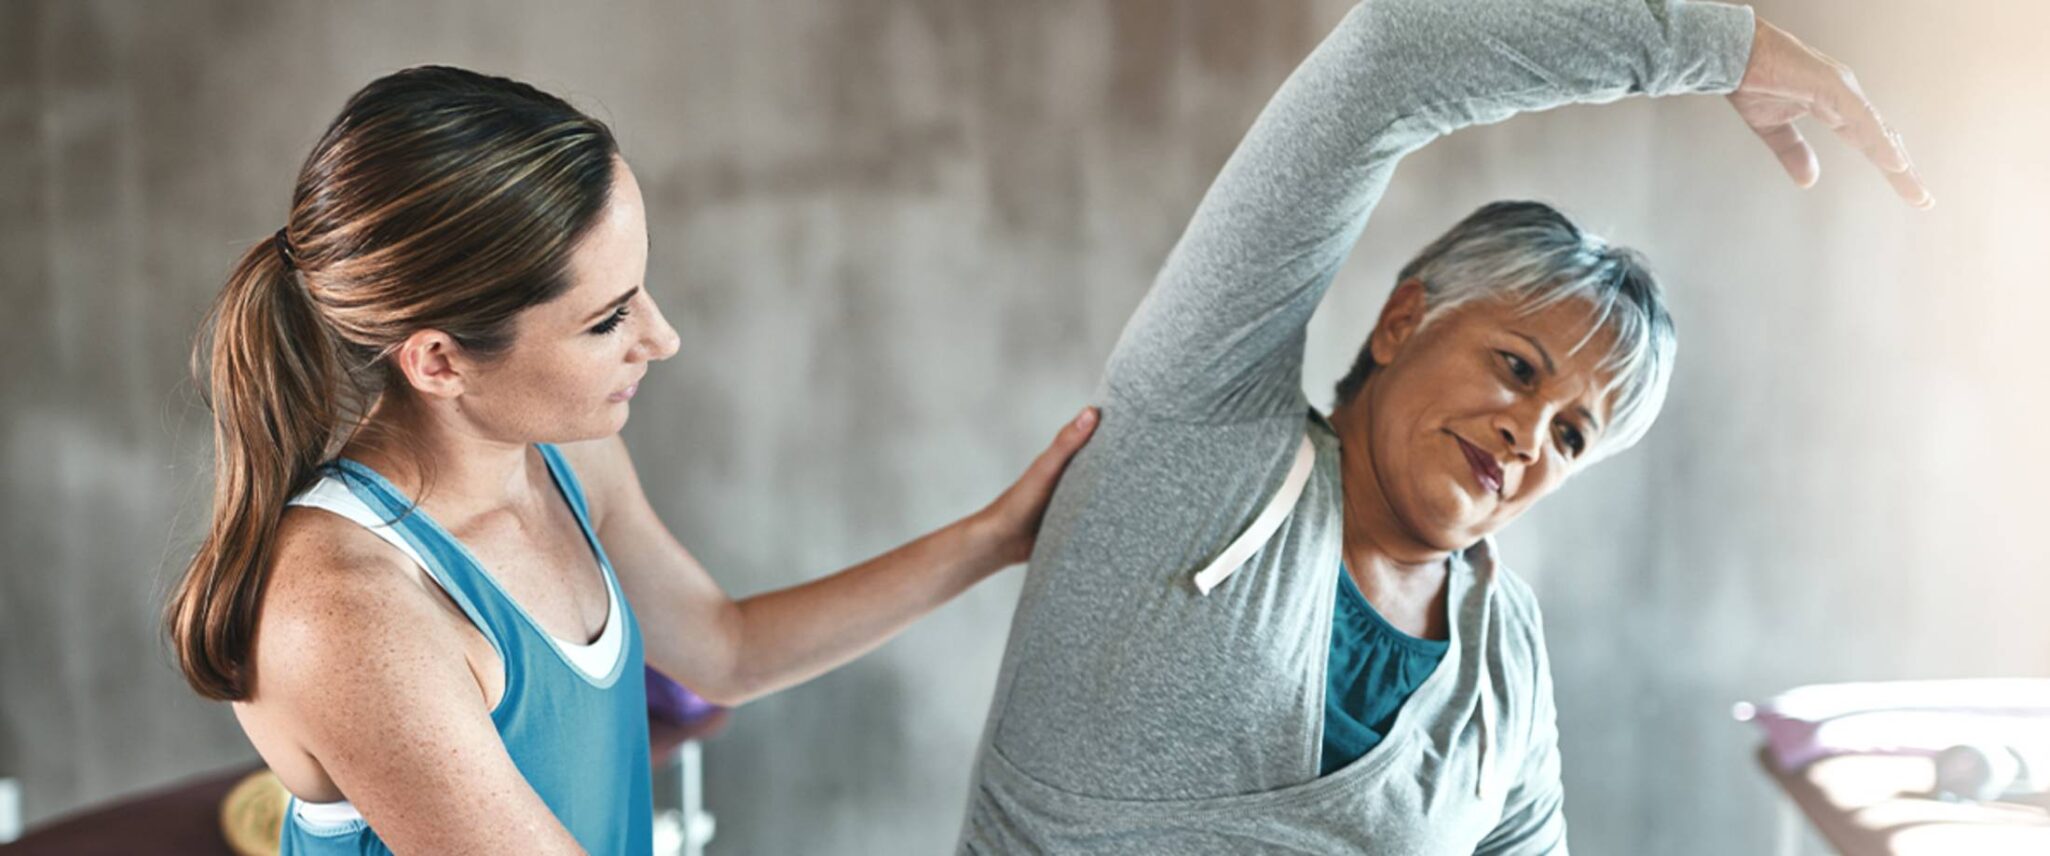 Senior woman stretching with the help of her physical therapist